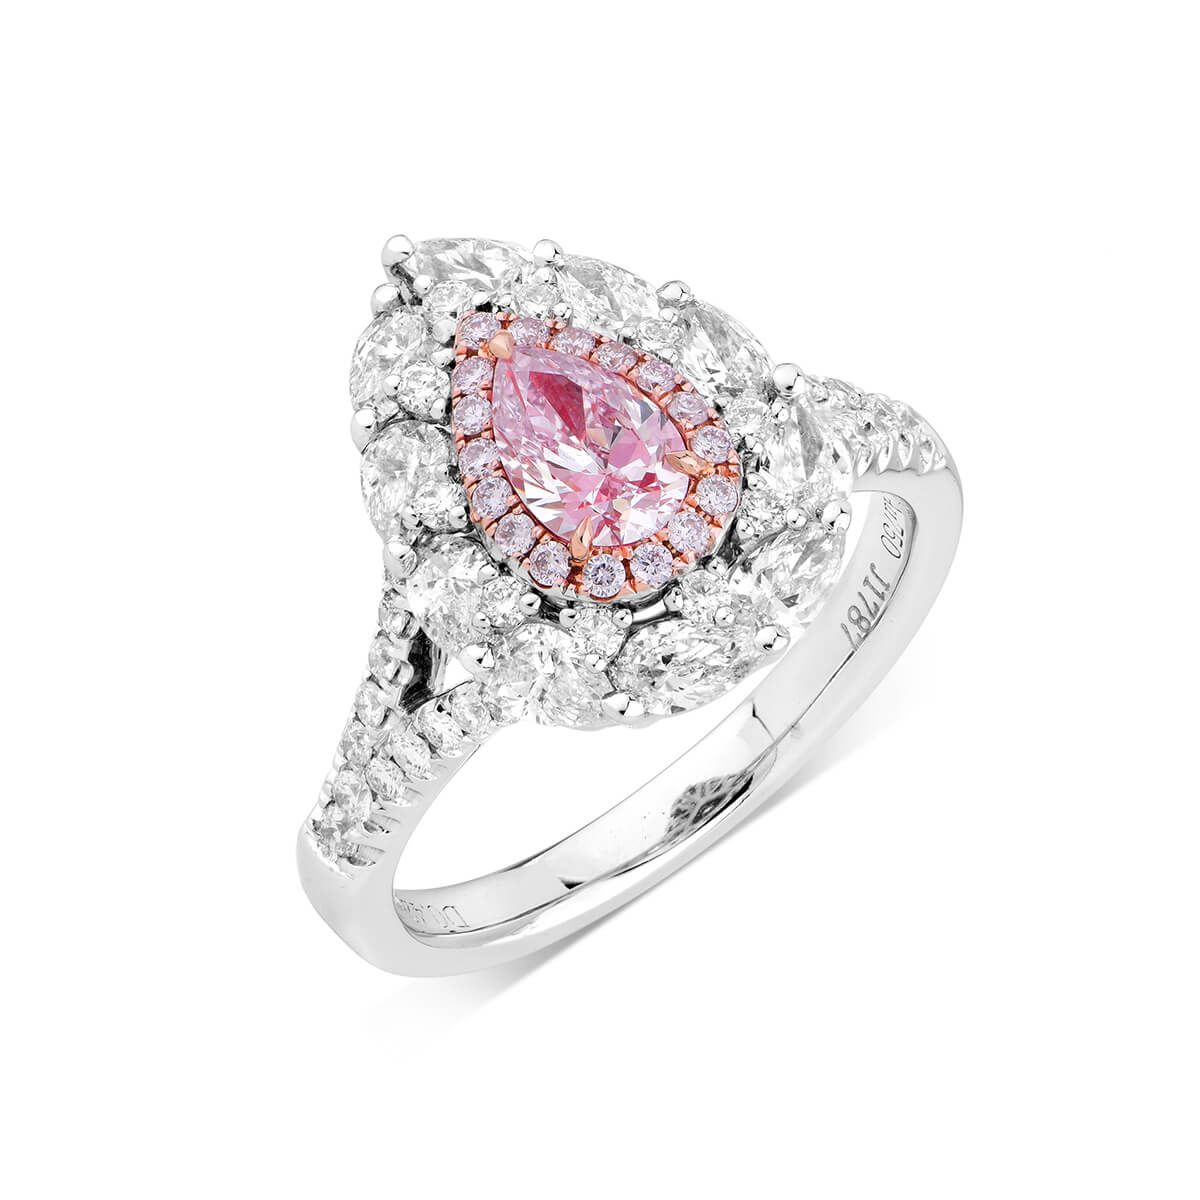 Faint Pink Diamond Ring, 1.68 Ct. TW, Pear shape, GIA Certified, 2244097367